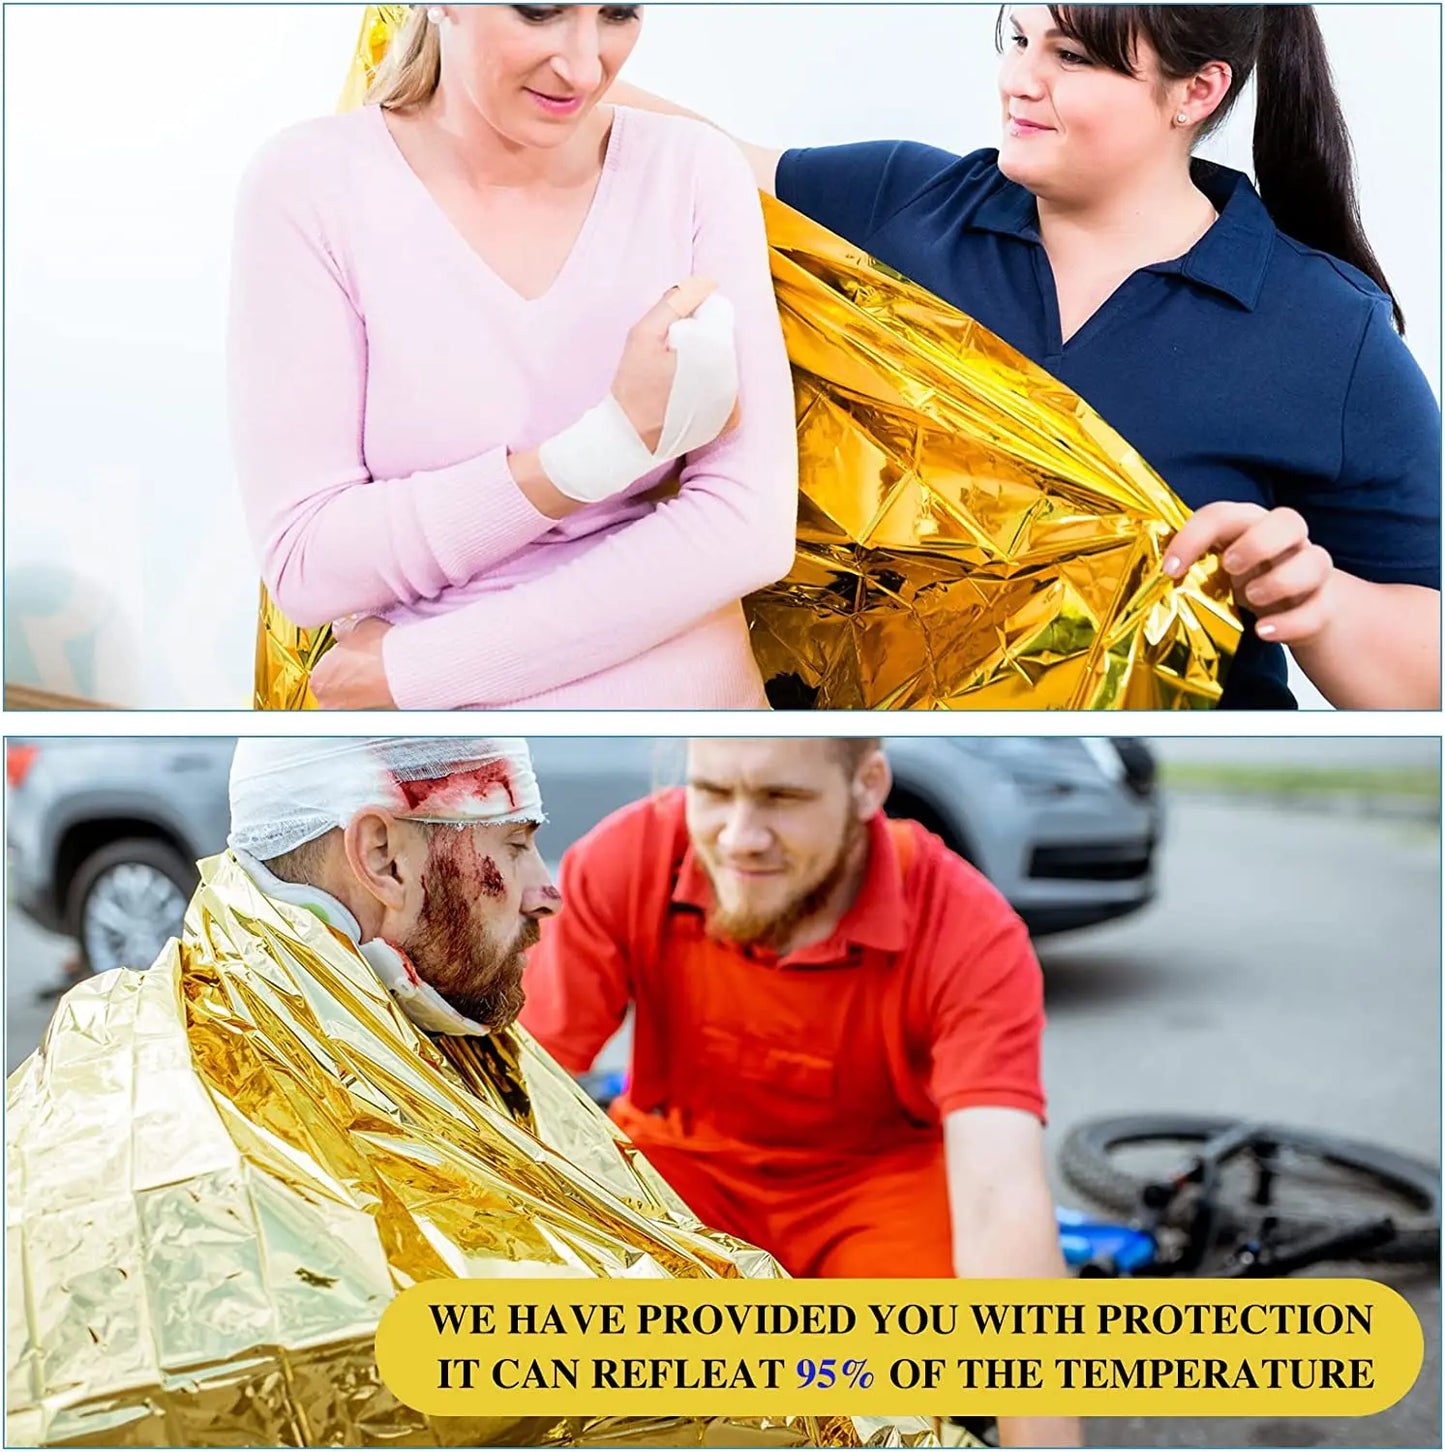 5-30Pc Outdoor Emergency Gold-Sliver Survival Blanket Waterproof First Aid Rescue Curtain Foil Thermal Military Blanket130X210Cm